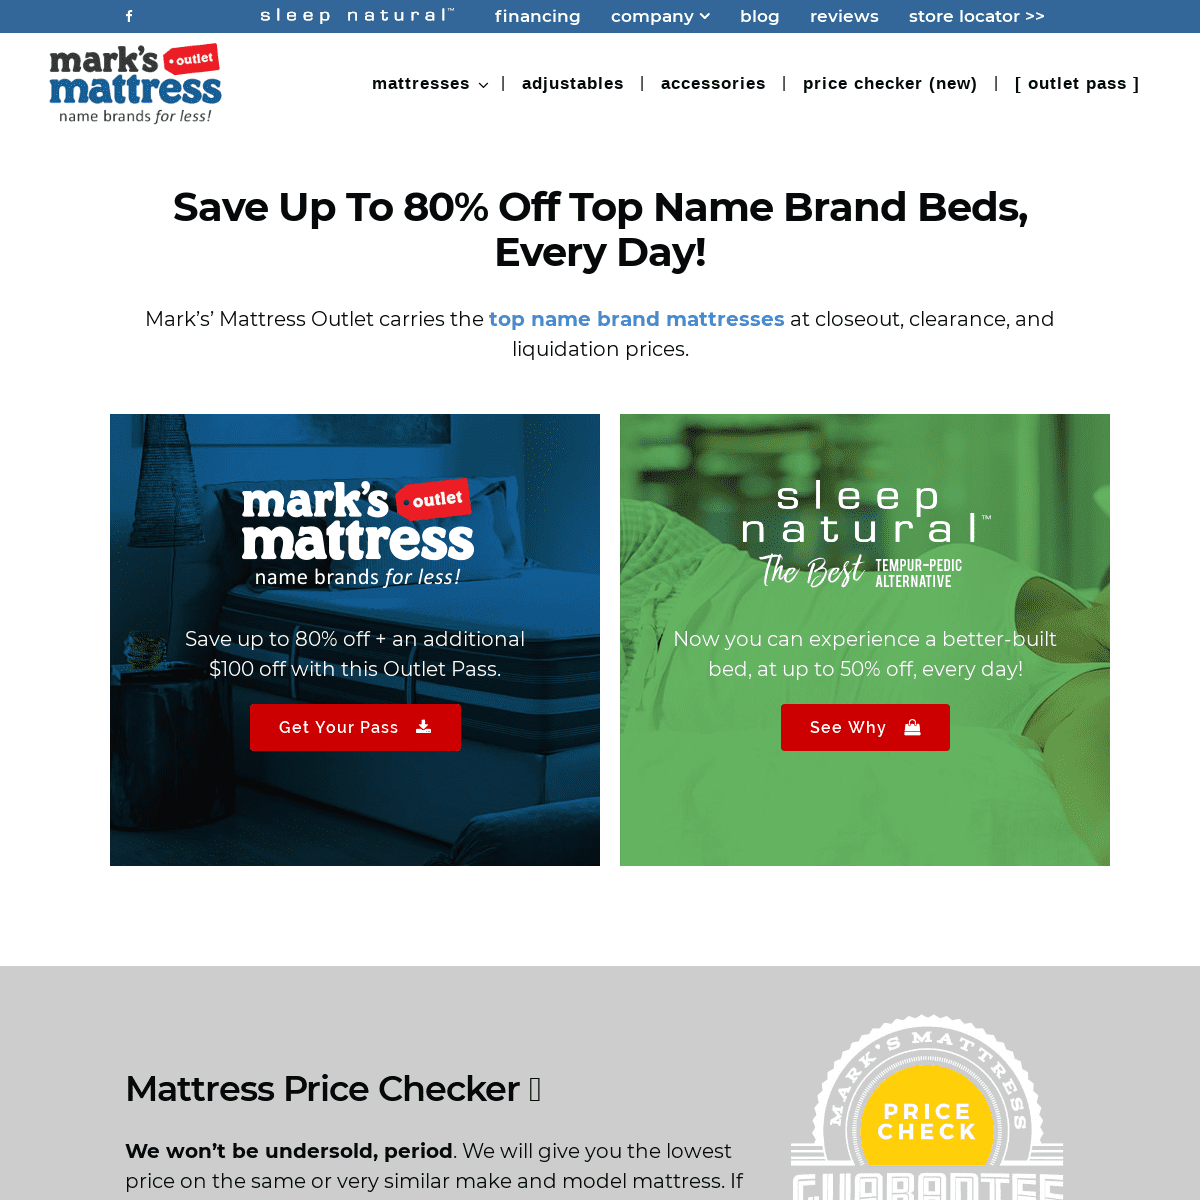 Mark's Mattress Outlet: Warehouse & Factory Clearance Name Brands